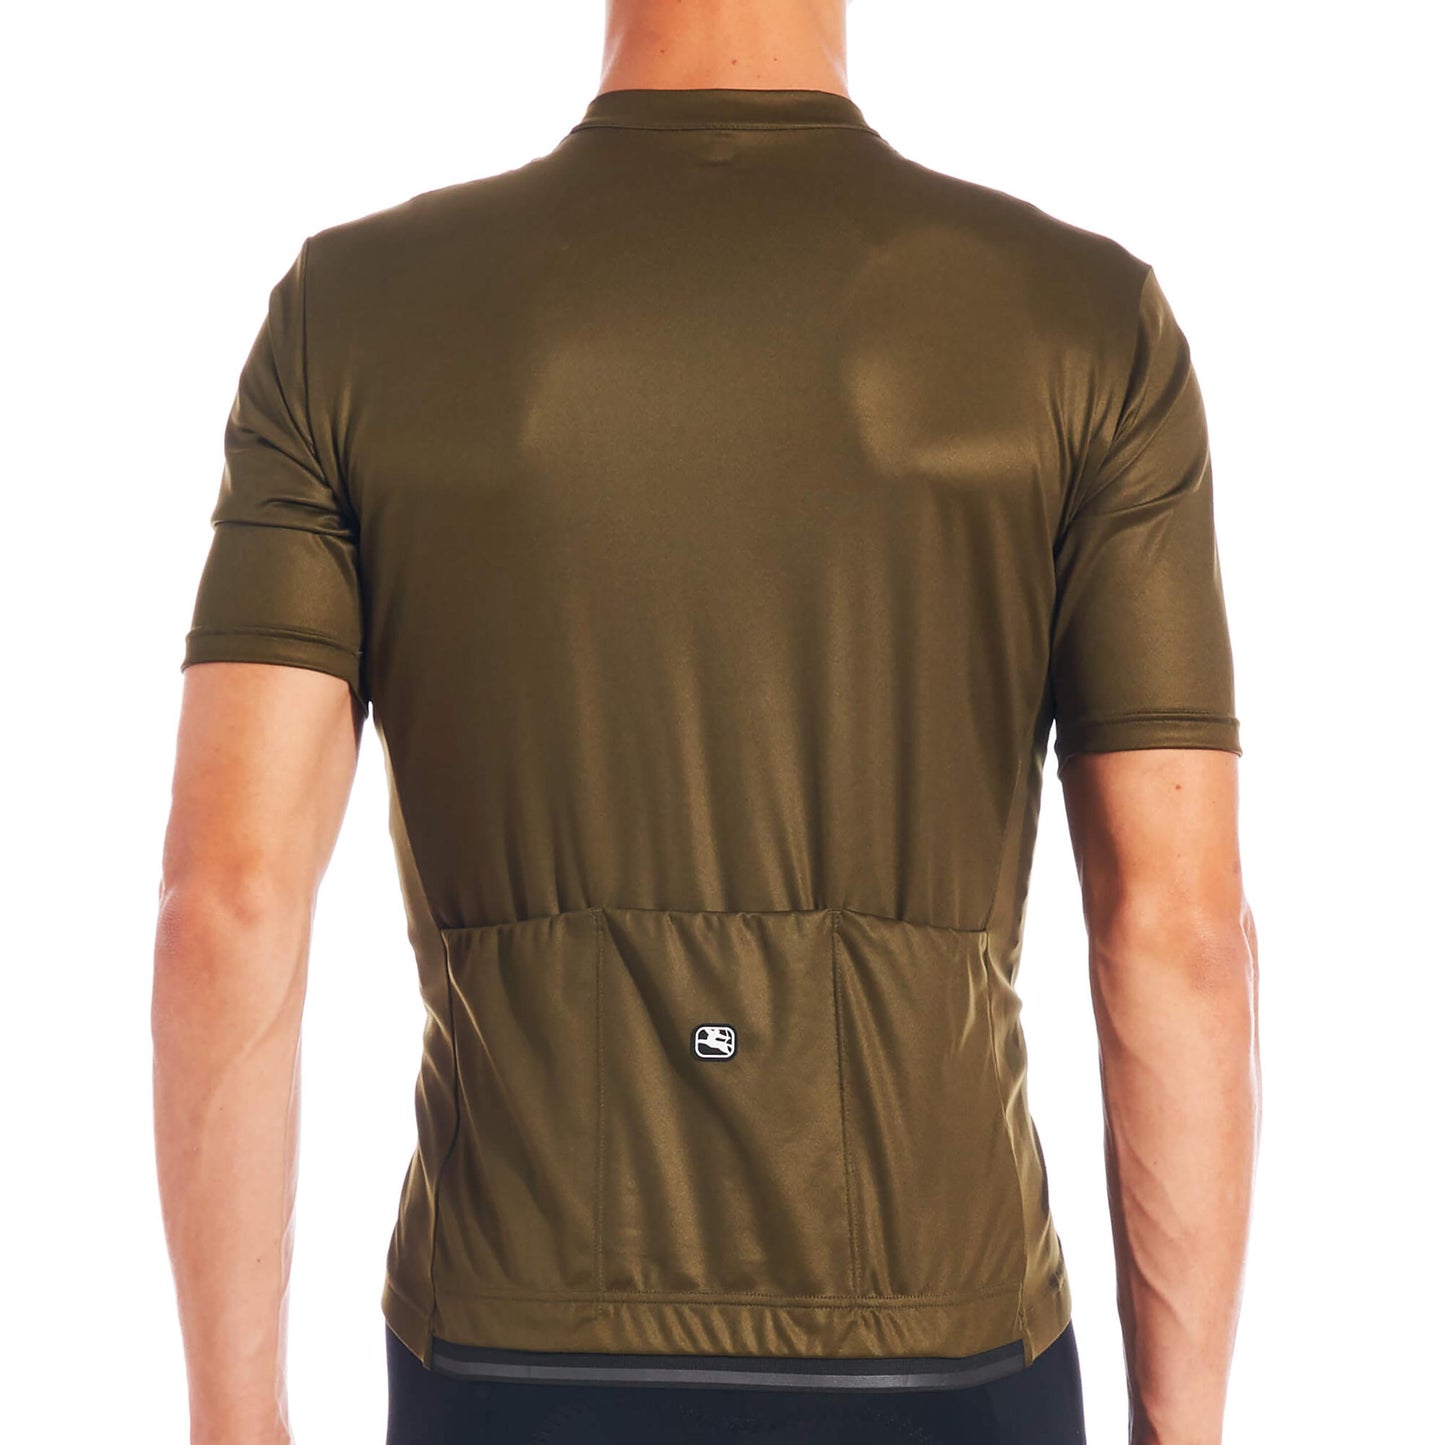 Men's Fusion Jersey olive